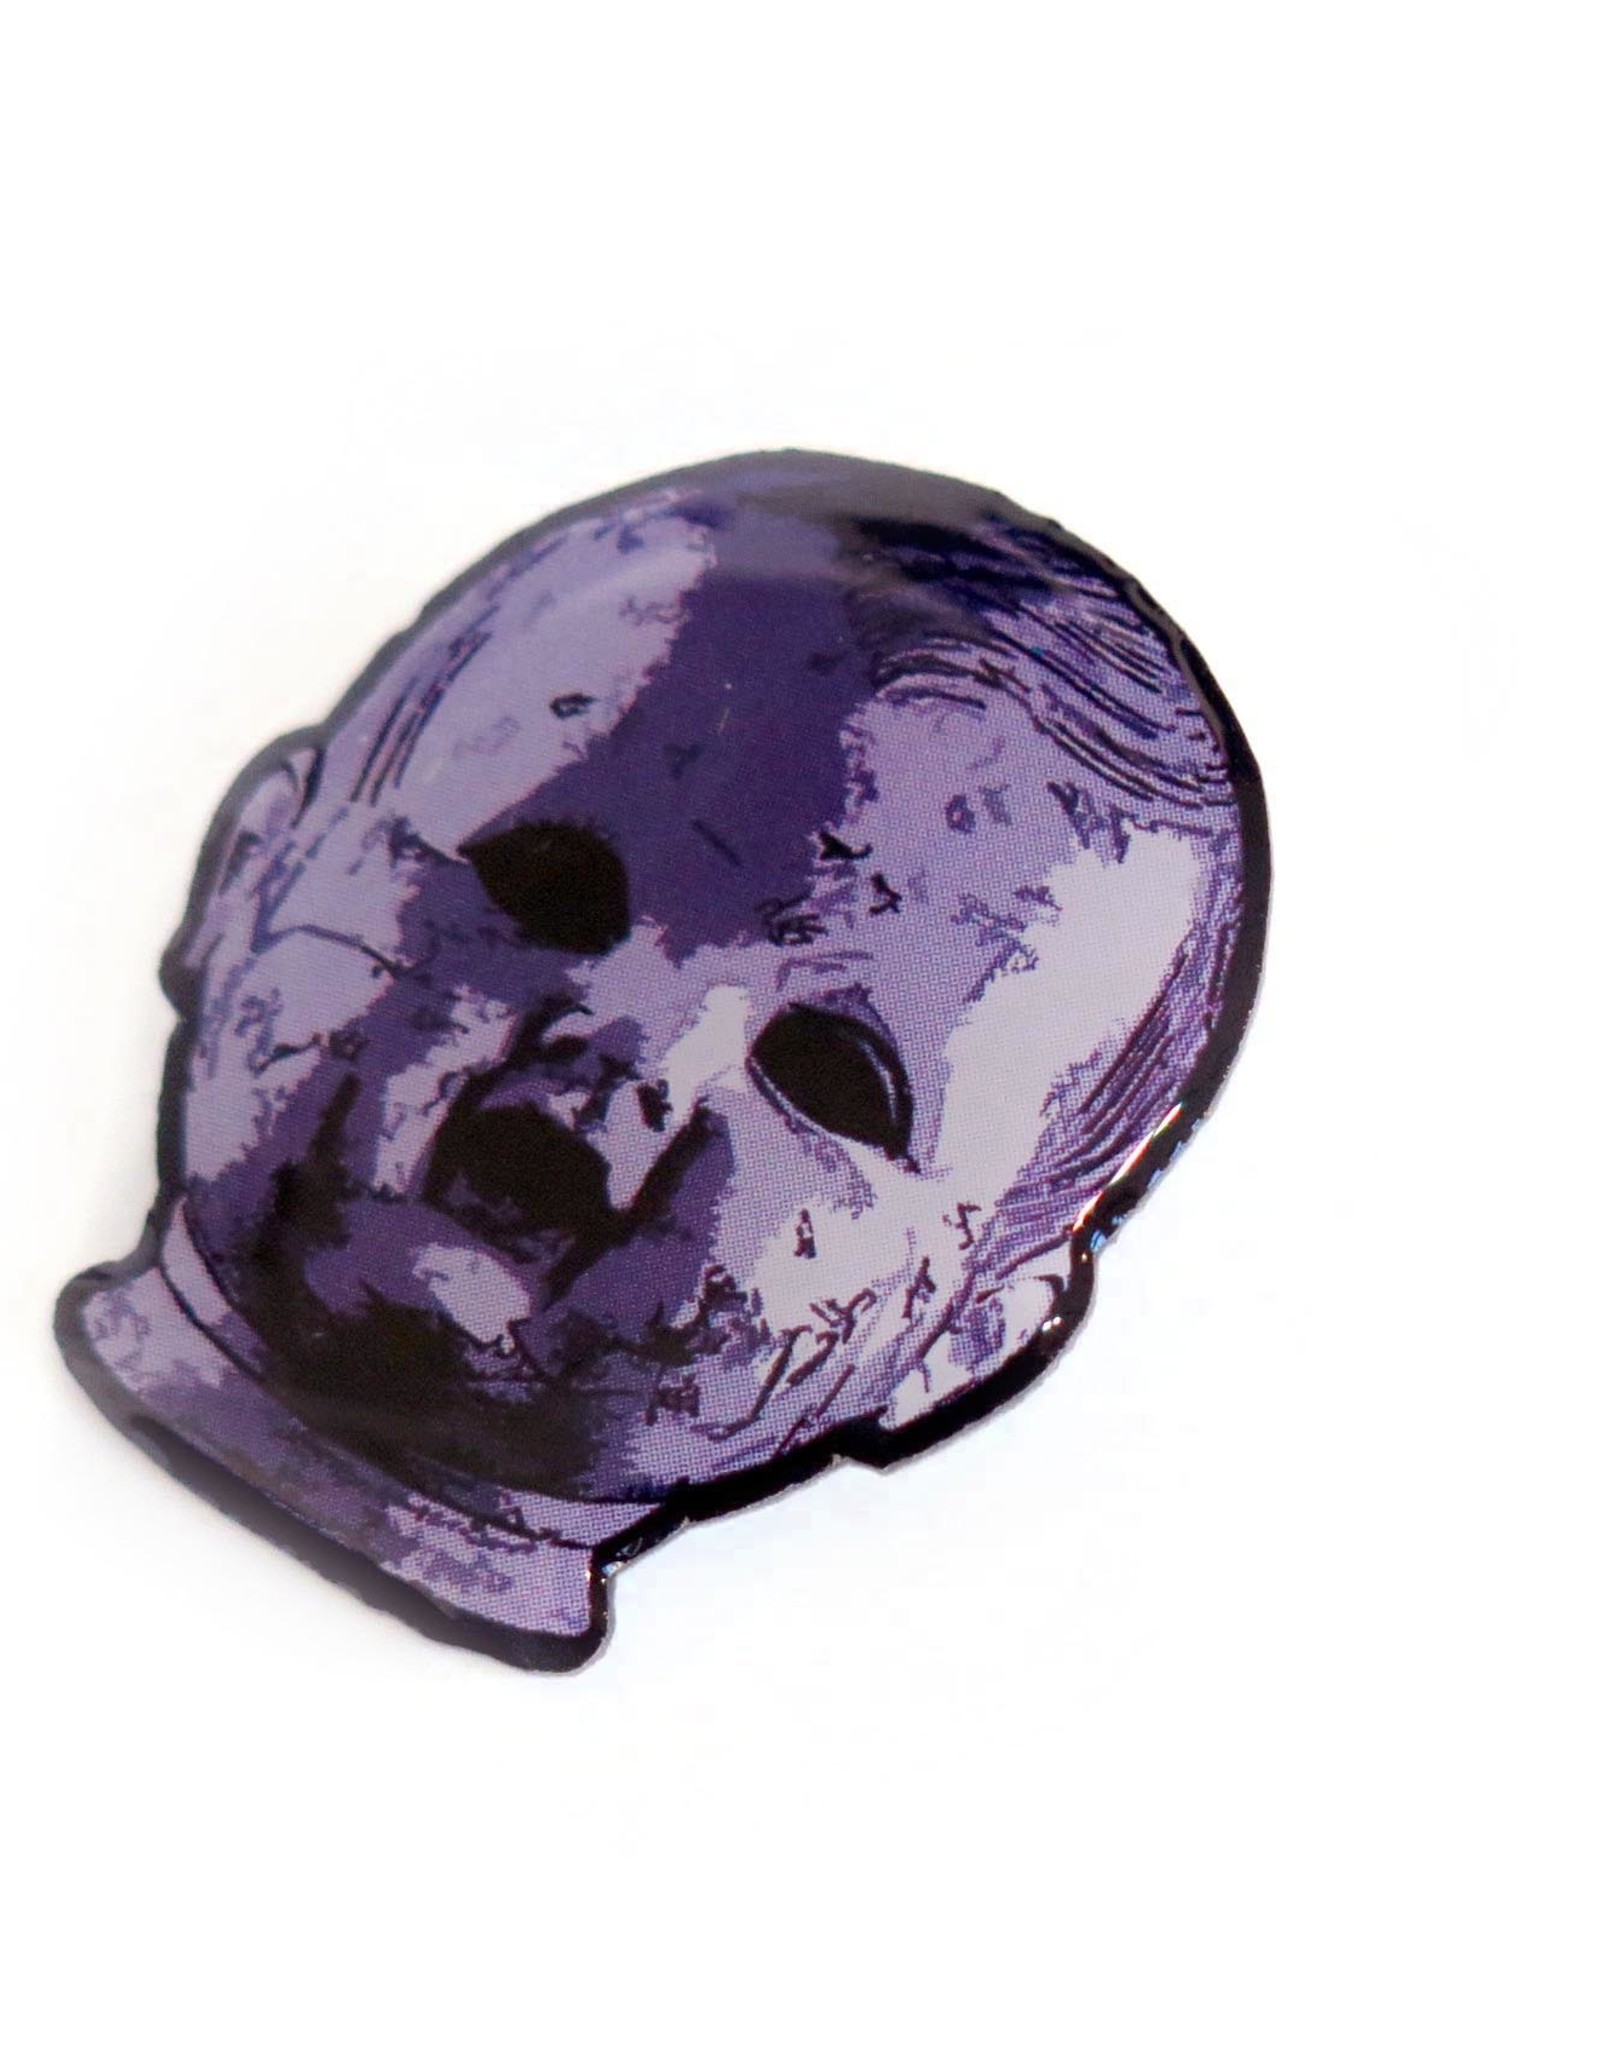 Doll Head pin by Spooky Spectacles